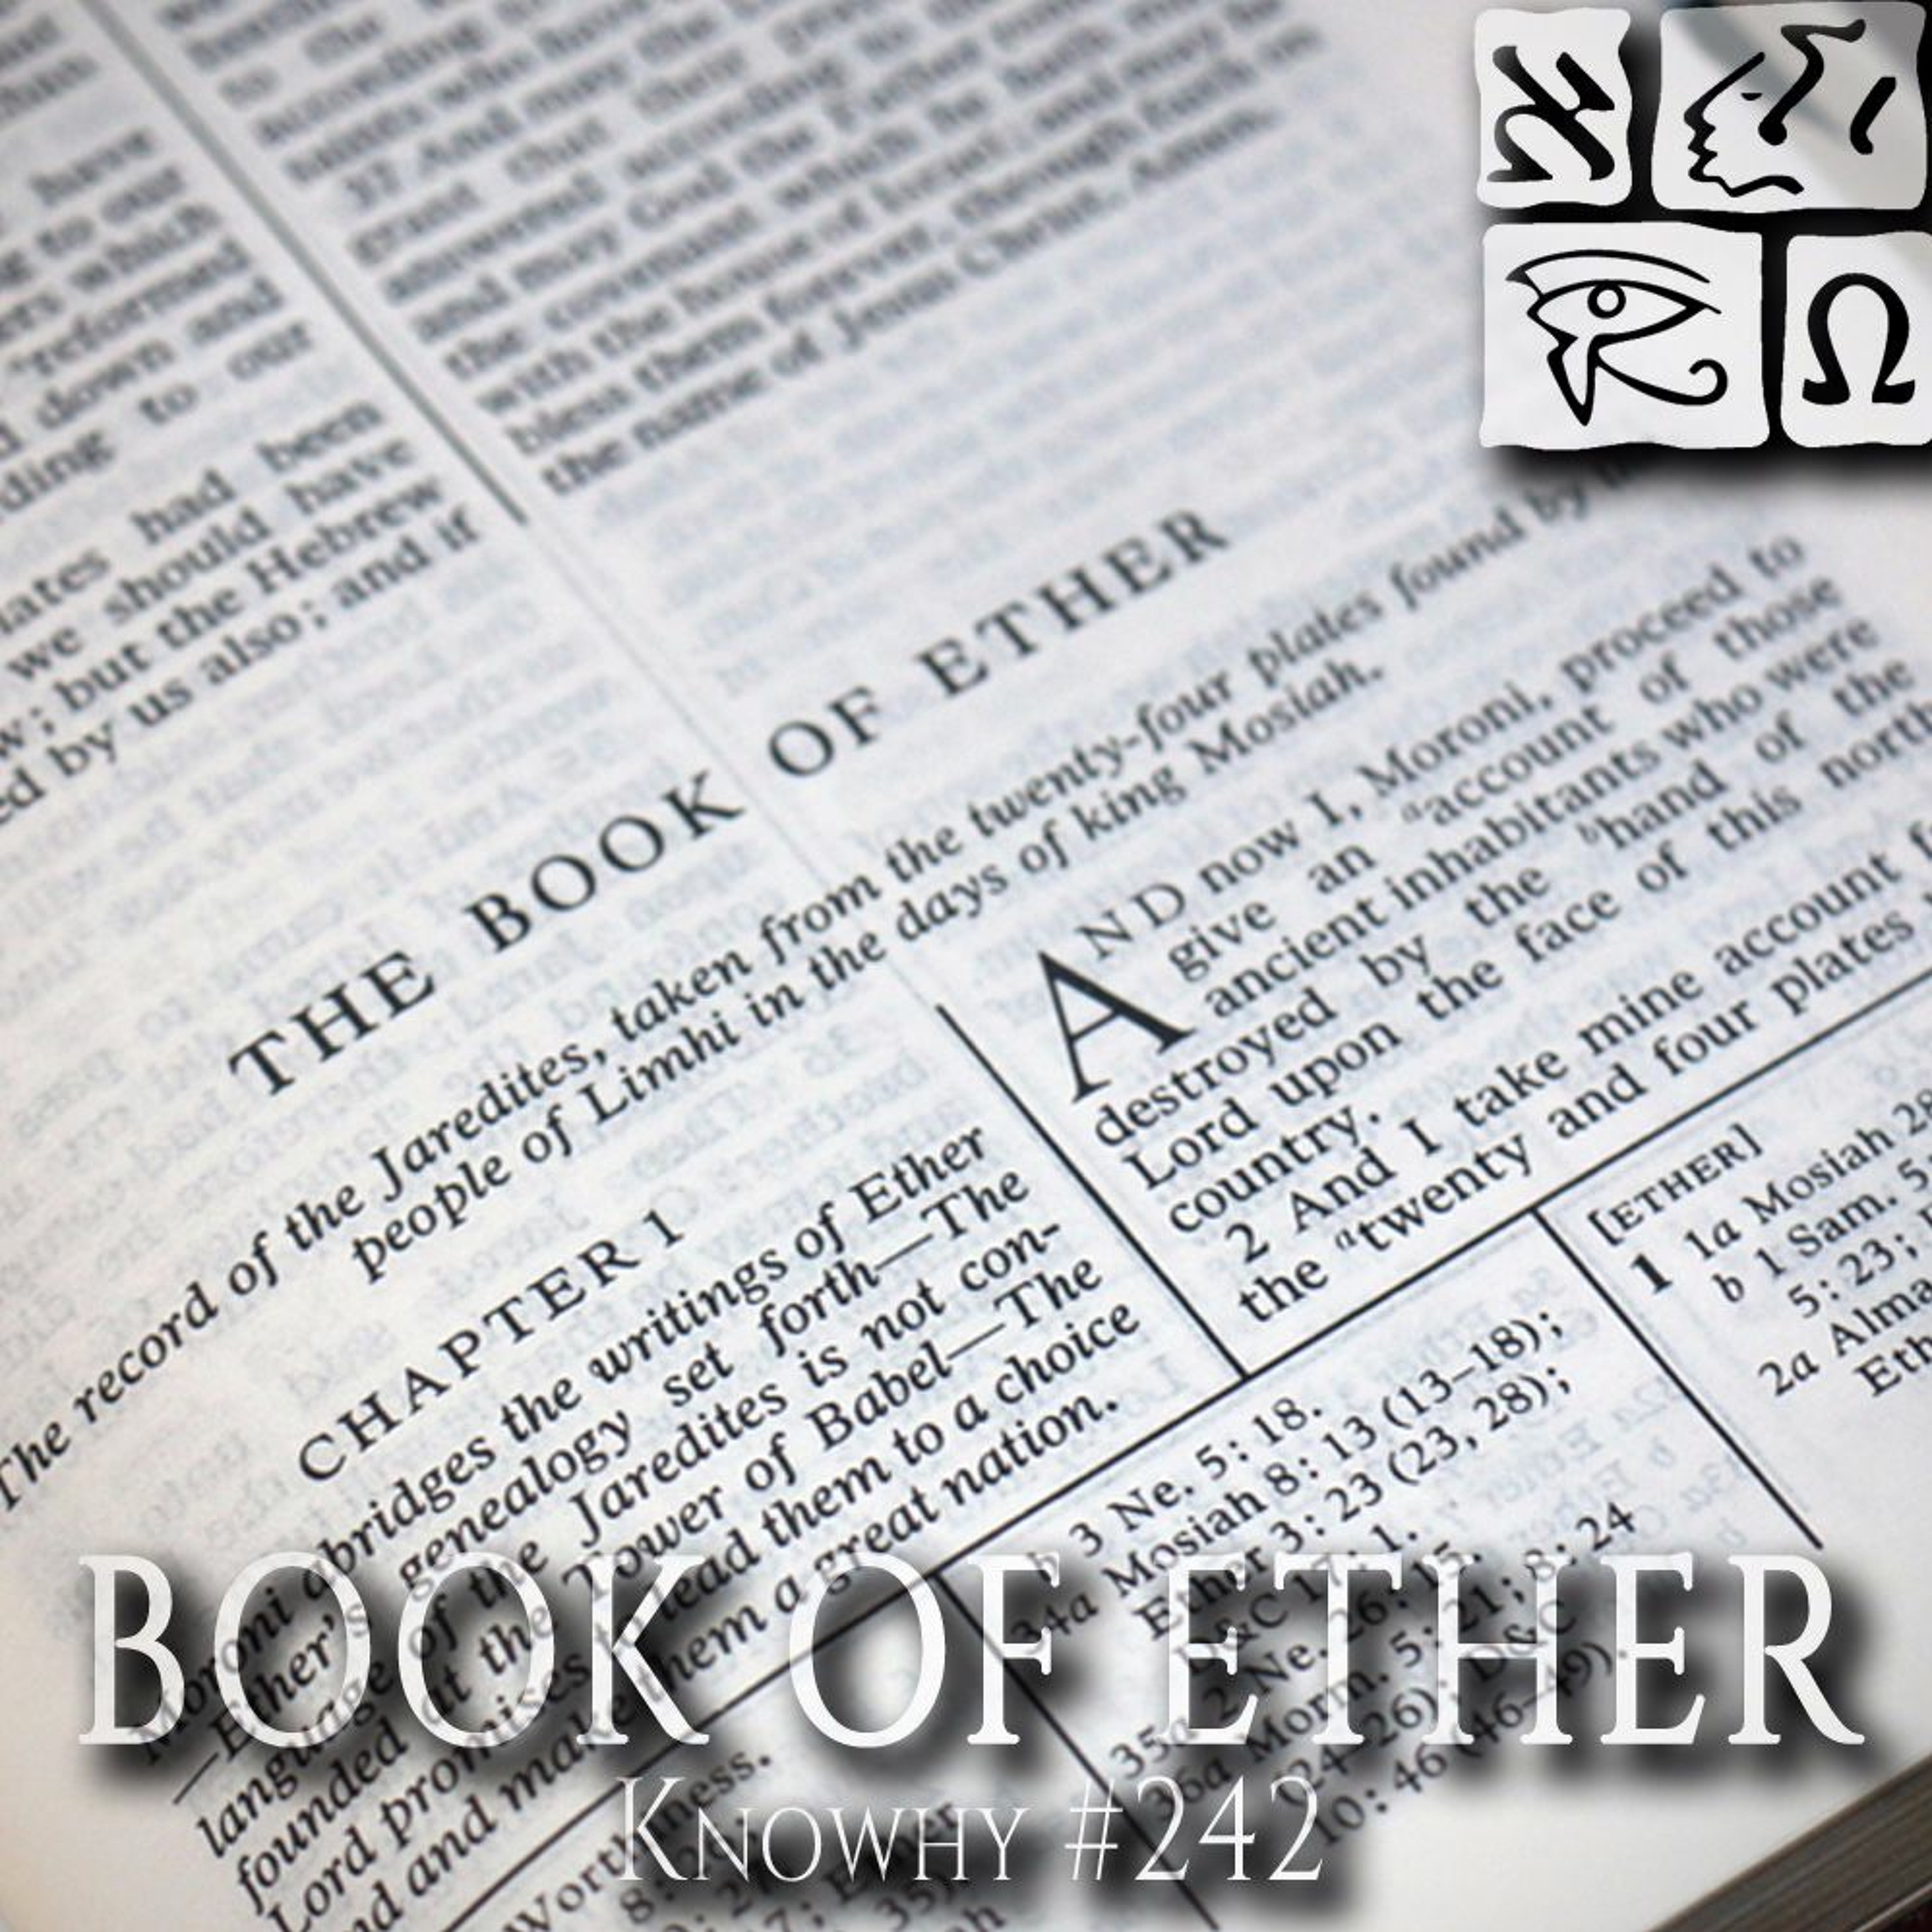 Why Did Moroni Comment So Much Throughout Ether? #242